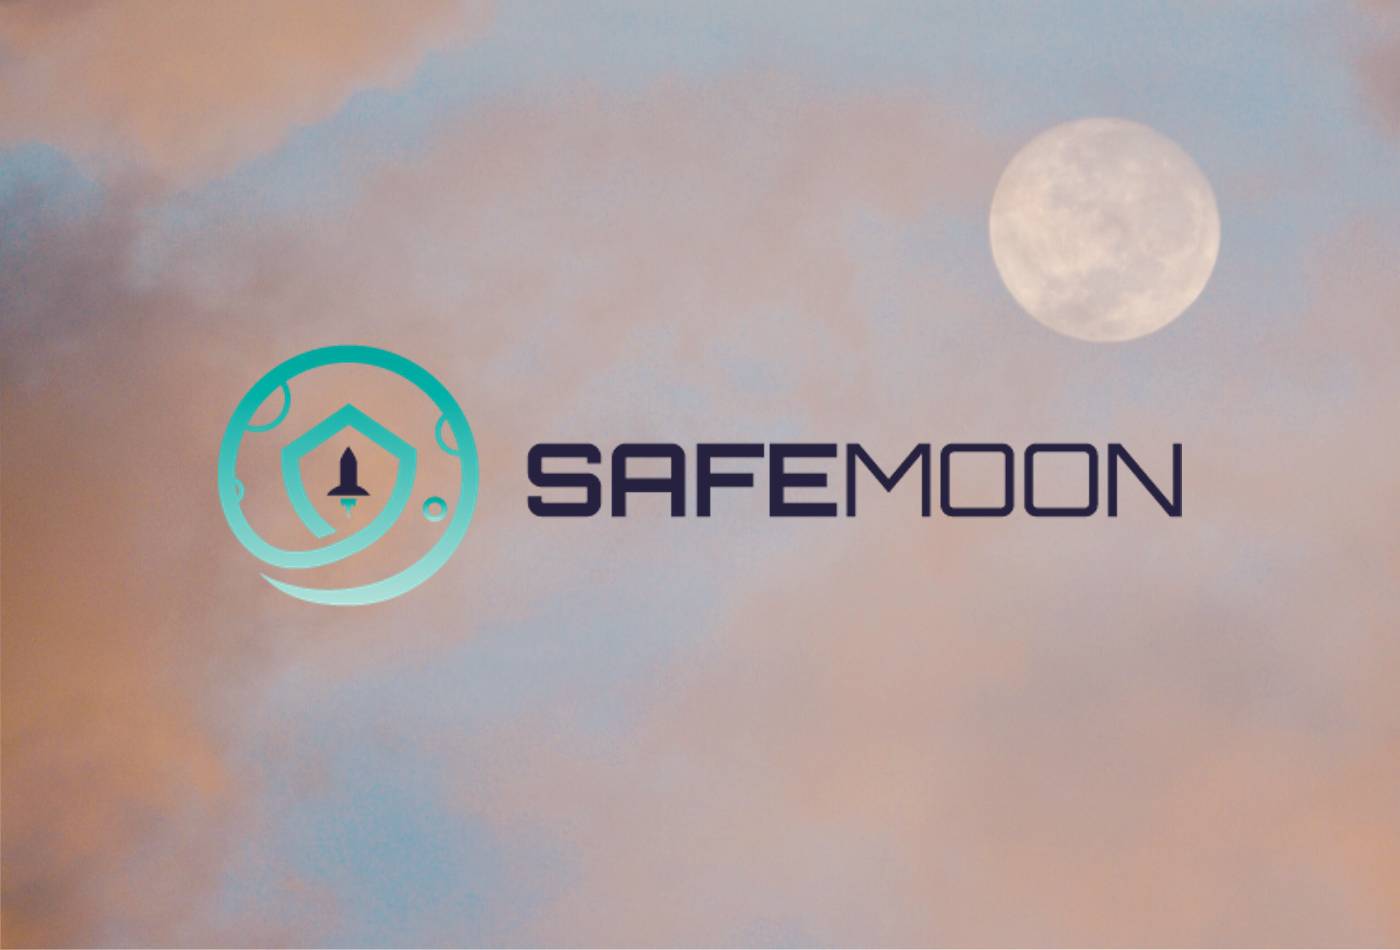 how to buy safemoon